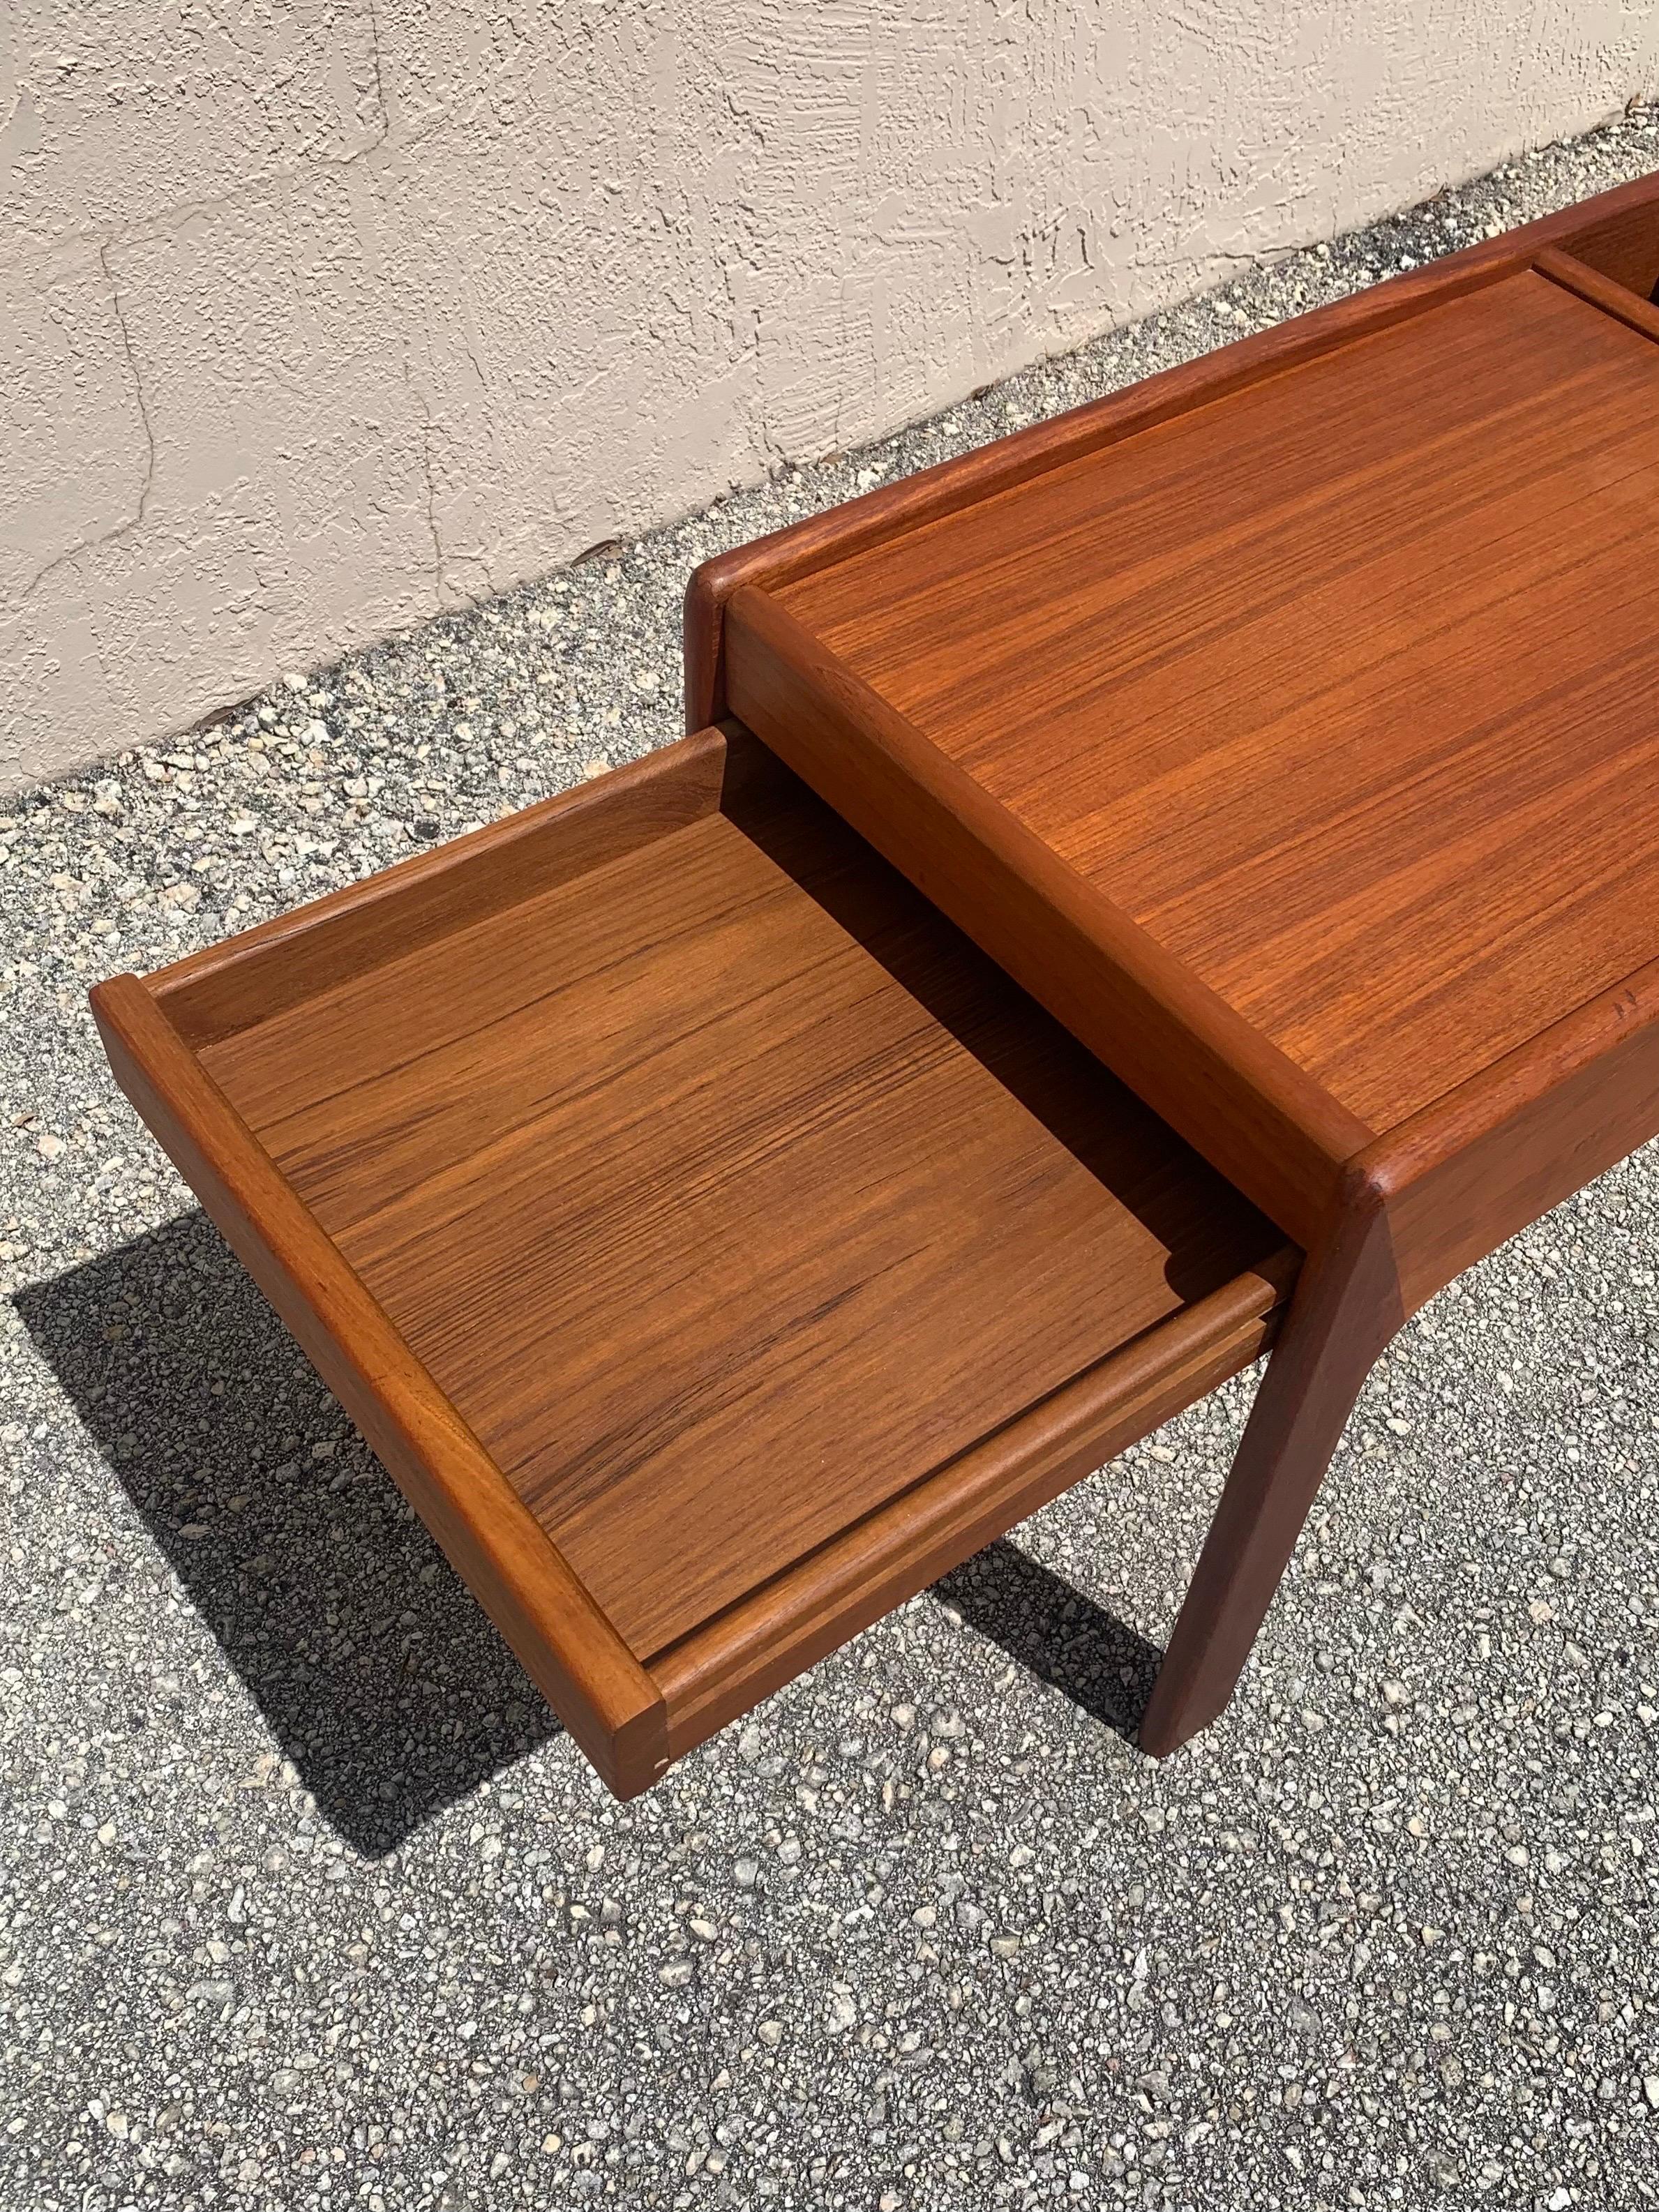 Mid Century Danish Teak Coffee Table with Suede Magazine Holder For Sale 6